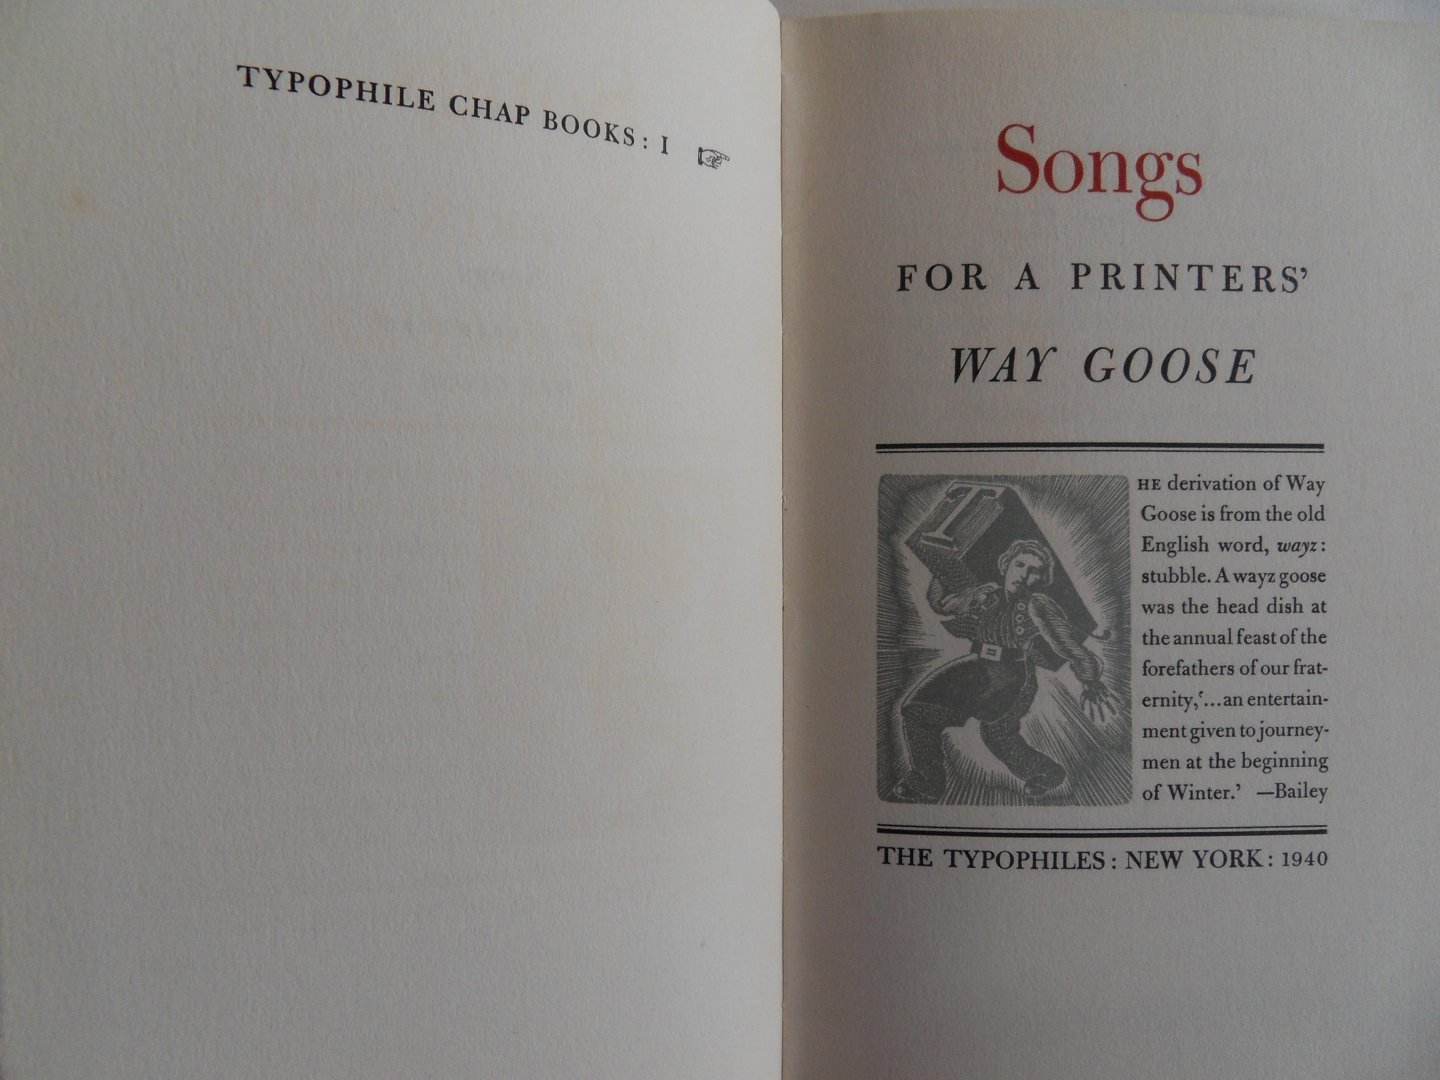 Bennett, Paul A. - Songs for a Printers` Way Goose. [ 300 Copies - This is the Printers` copy ].